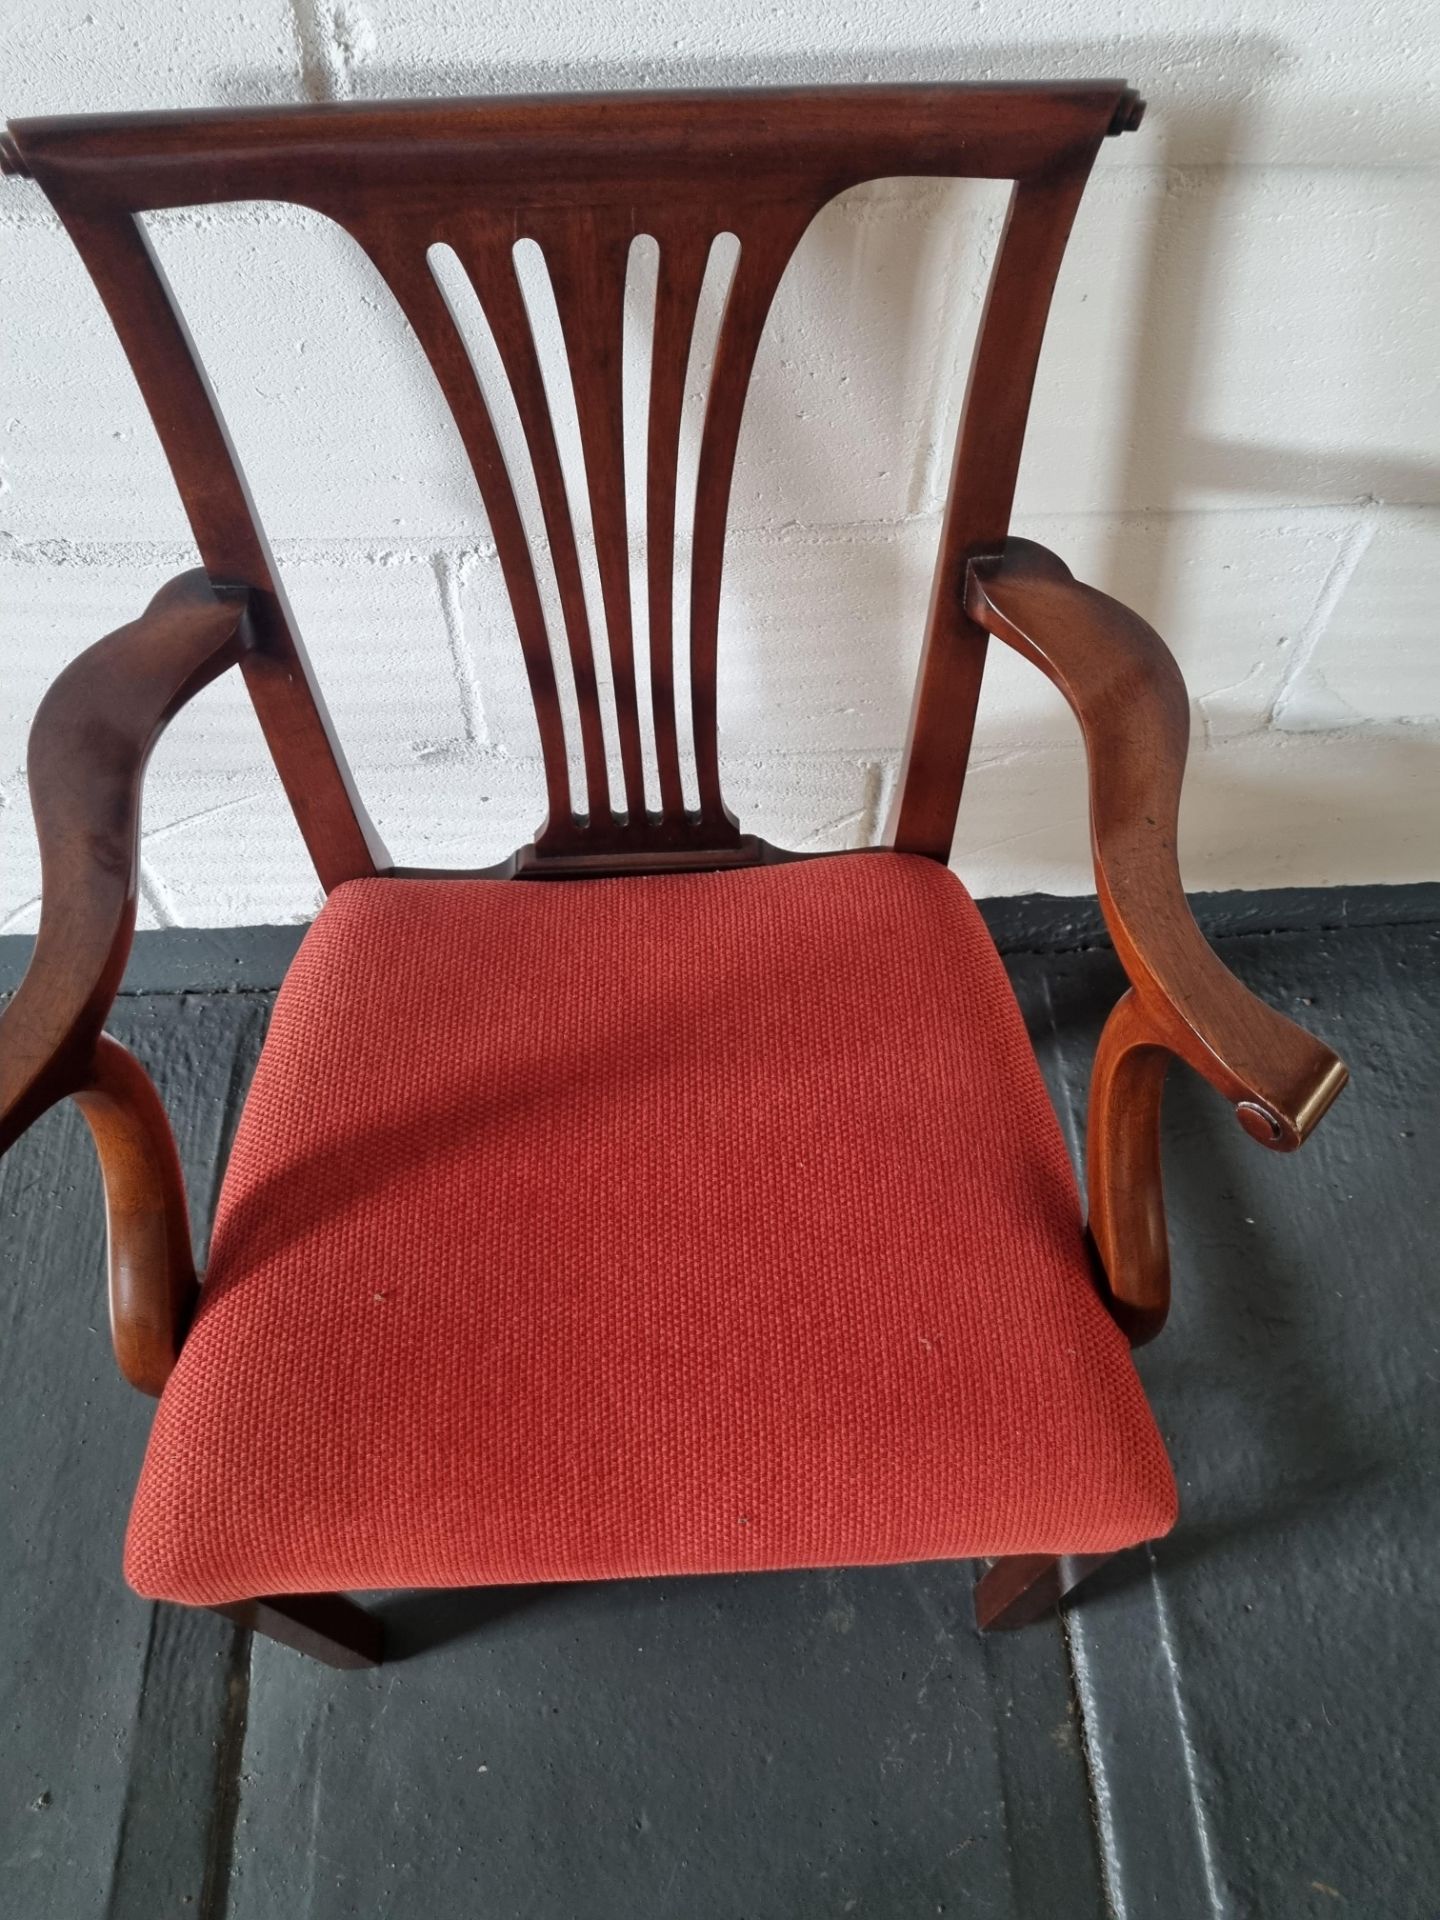 Arthur Brett Mahogany Dining Arm Chair With Spindle Detail To Back And Carved Tapered Front Legs - Image 5 of 6